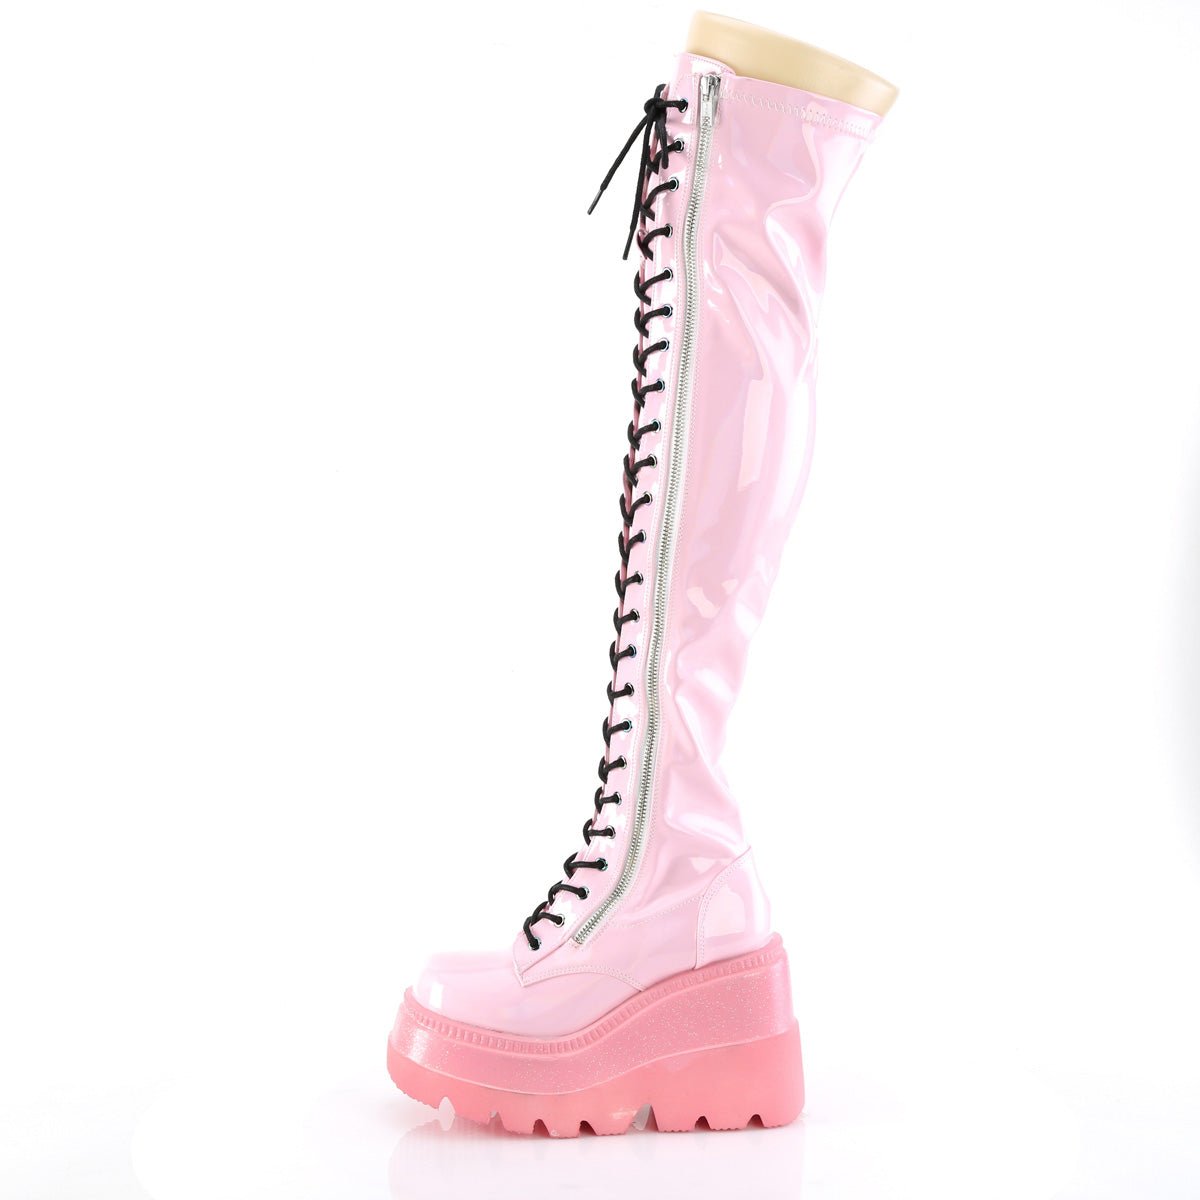 Too Fast | Demonia Shaker 374 1 | Baby Pink Hologram Stretch Patent Leather Women's Over The Knee Boots